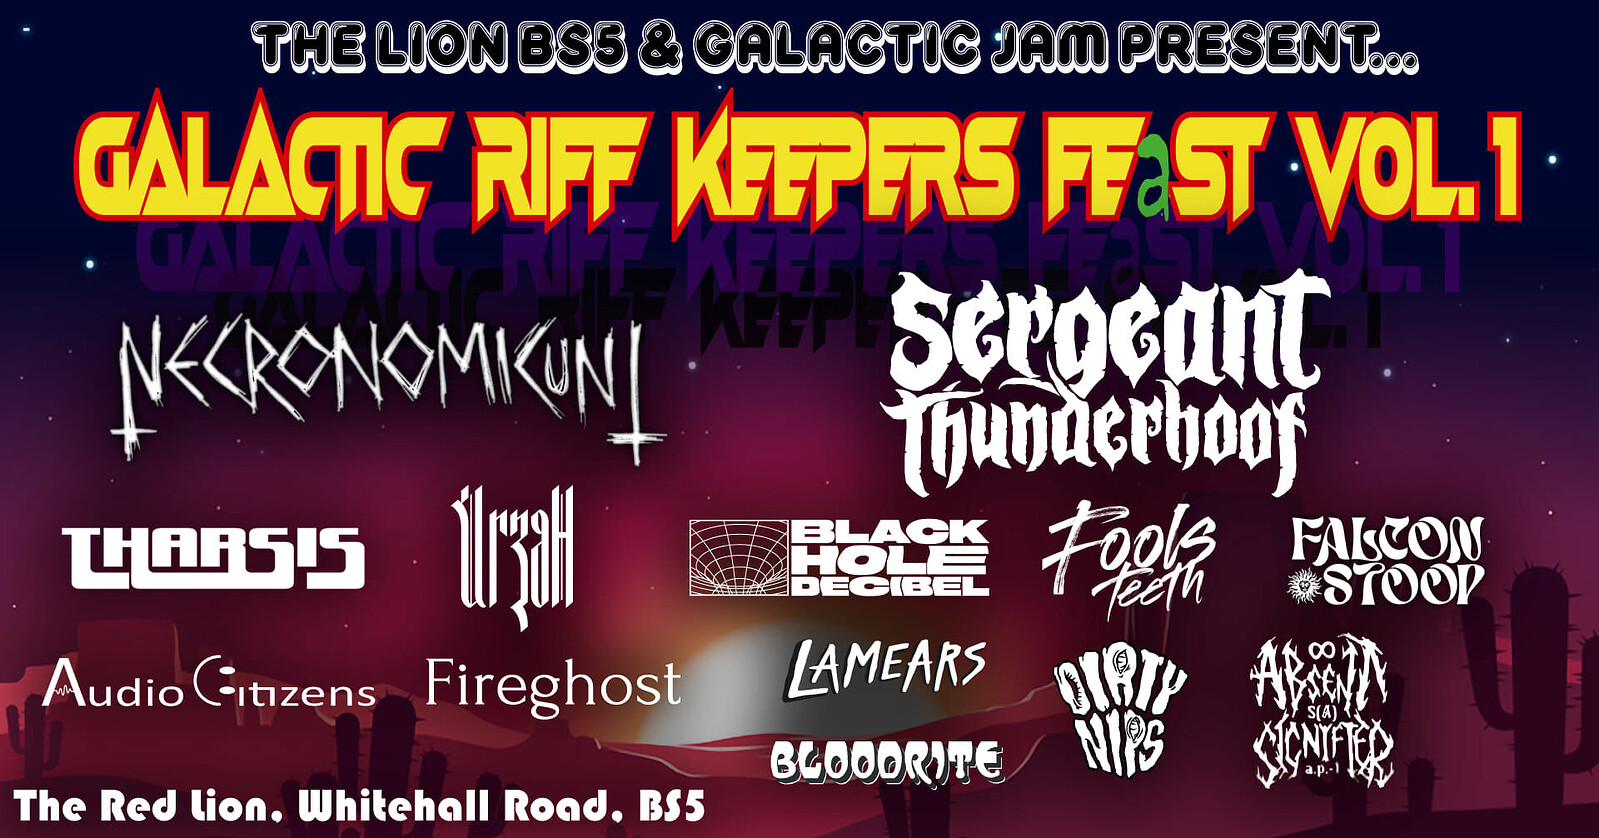 Galactic Riff Keepers Fest Vol.1 - DAY 1 at The Lion BS5